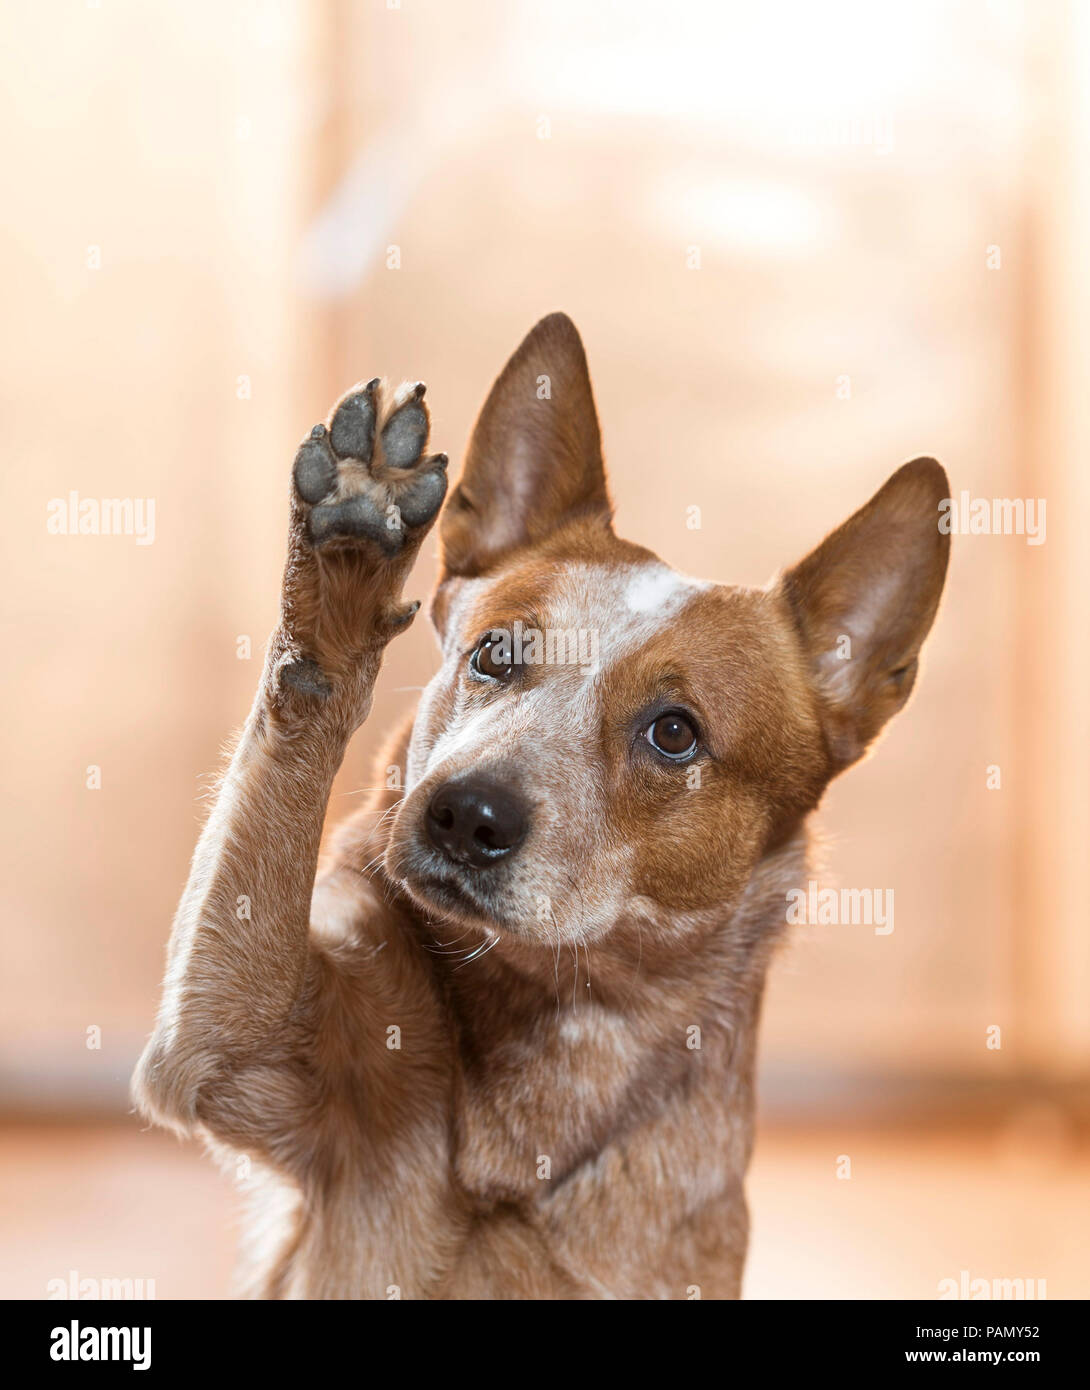 Australian Cattle Dog. Adult raises a front paw. Germany.. Stock Photo